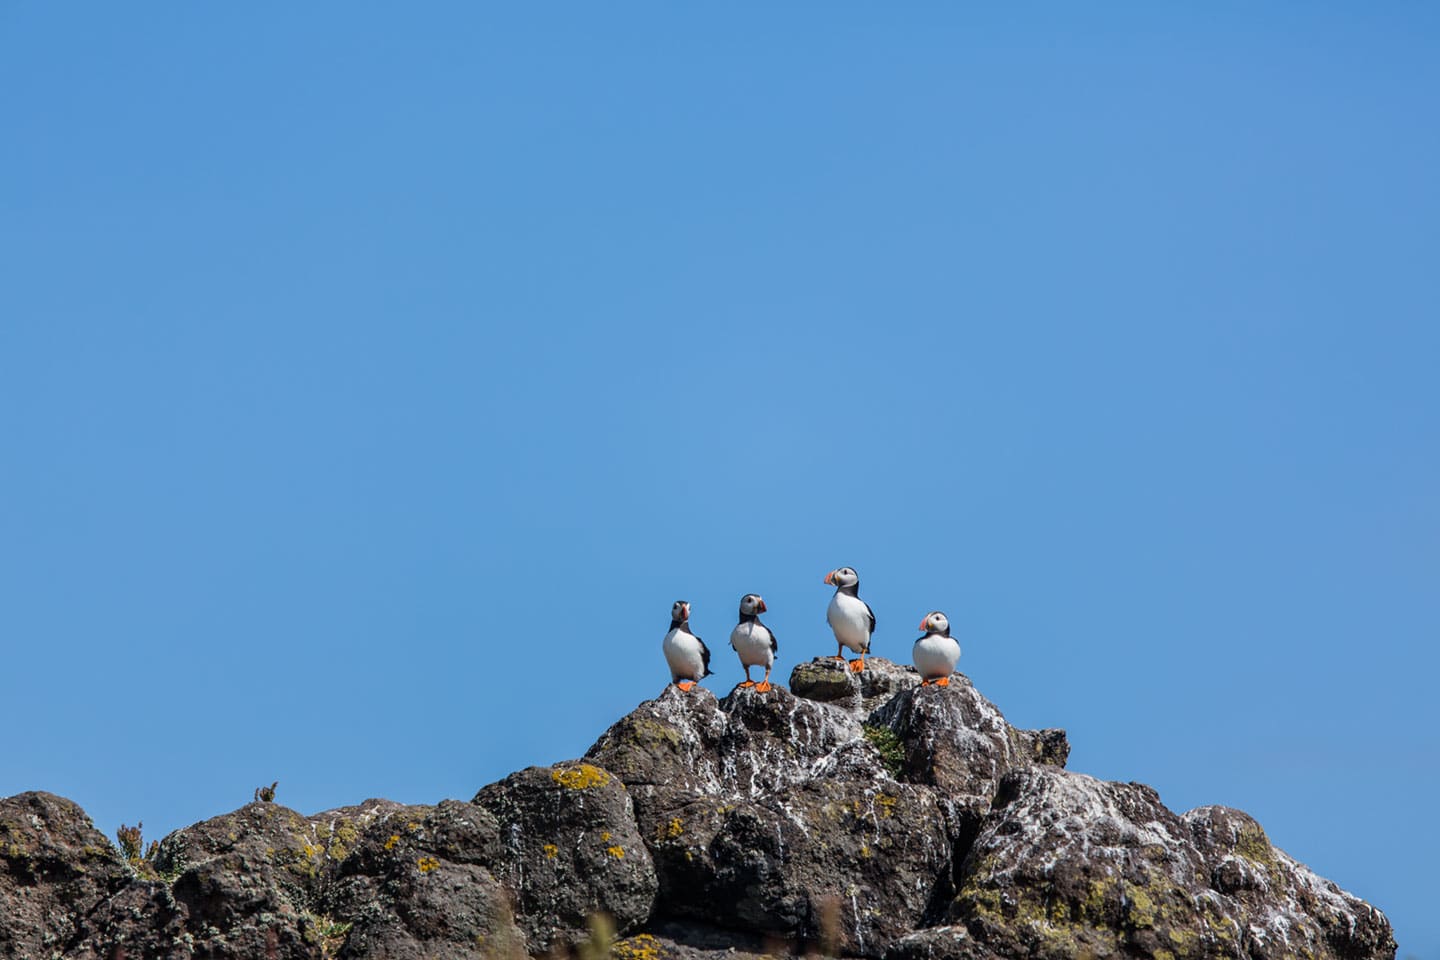 Puffin family in Scotland on the Isle of May